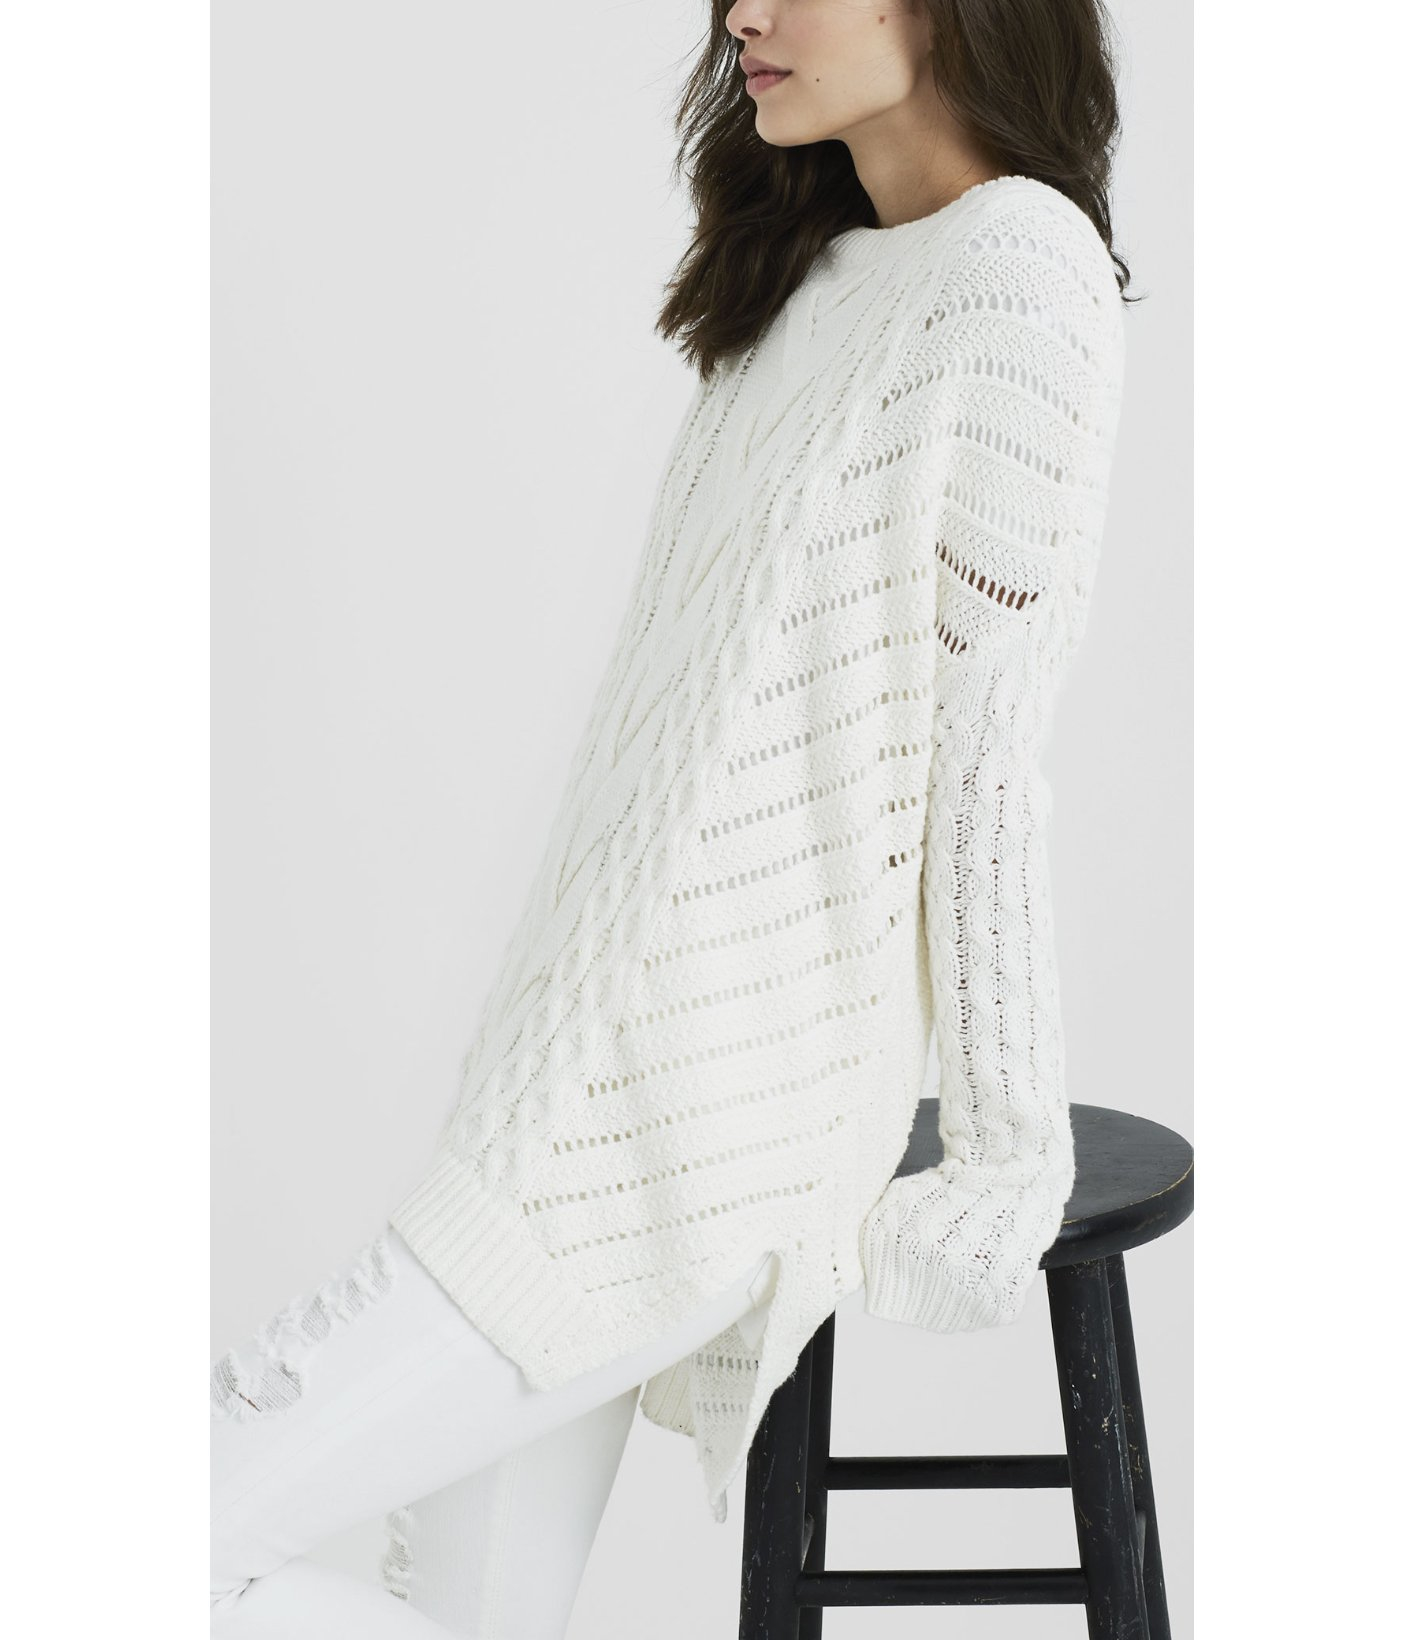 Express Oversized Open Cable Knit Tunic Sweater in Soft Ivory (White) - Lyst